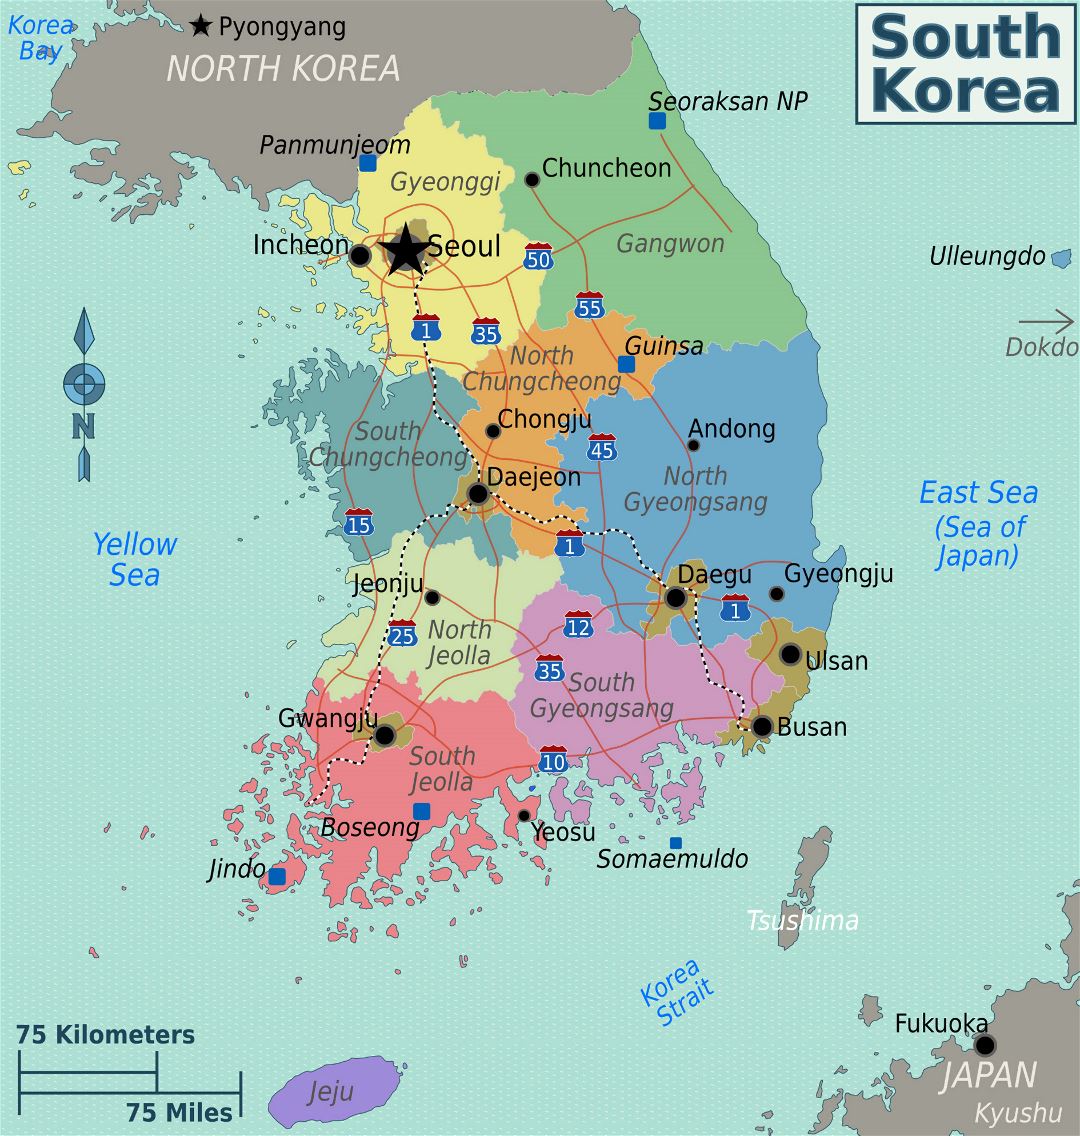 Large regions map of South Korea